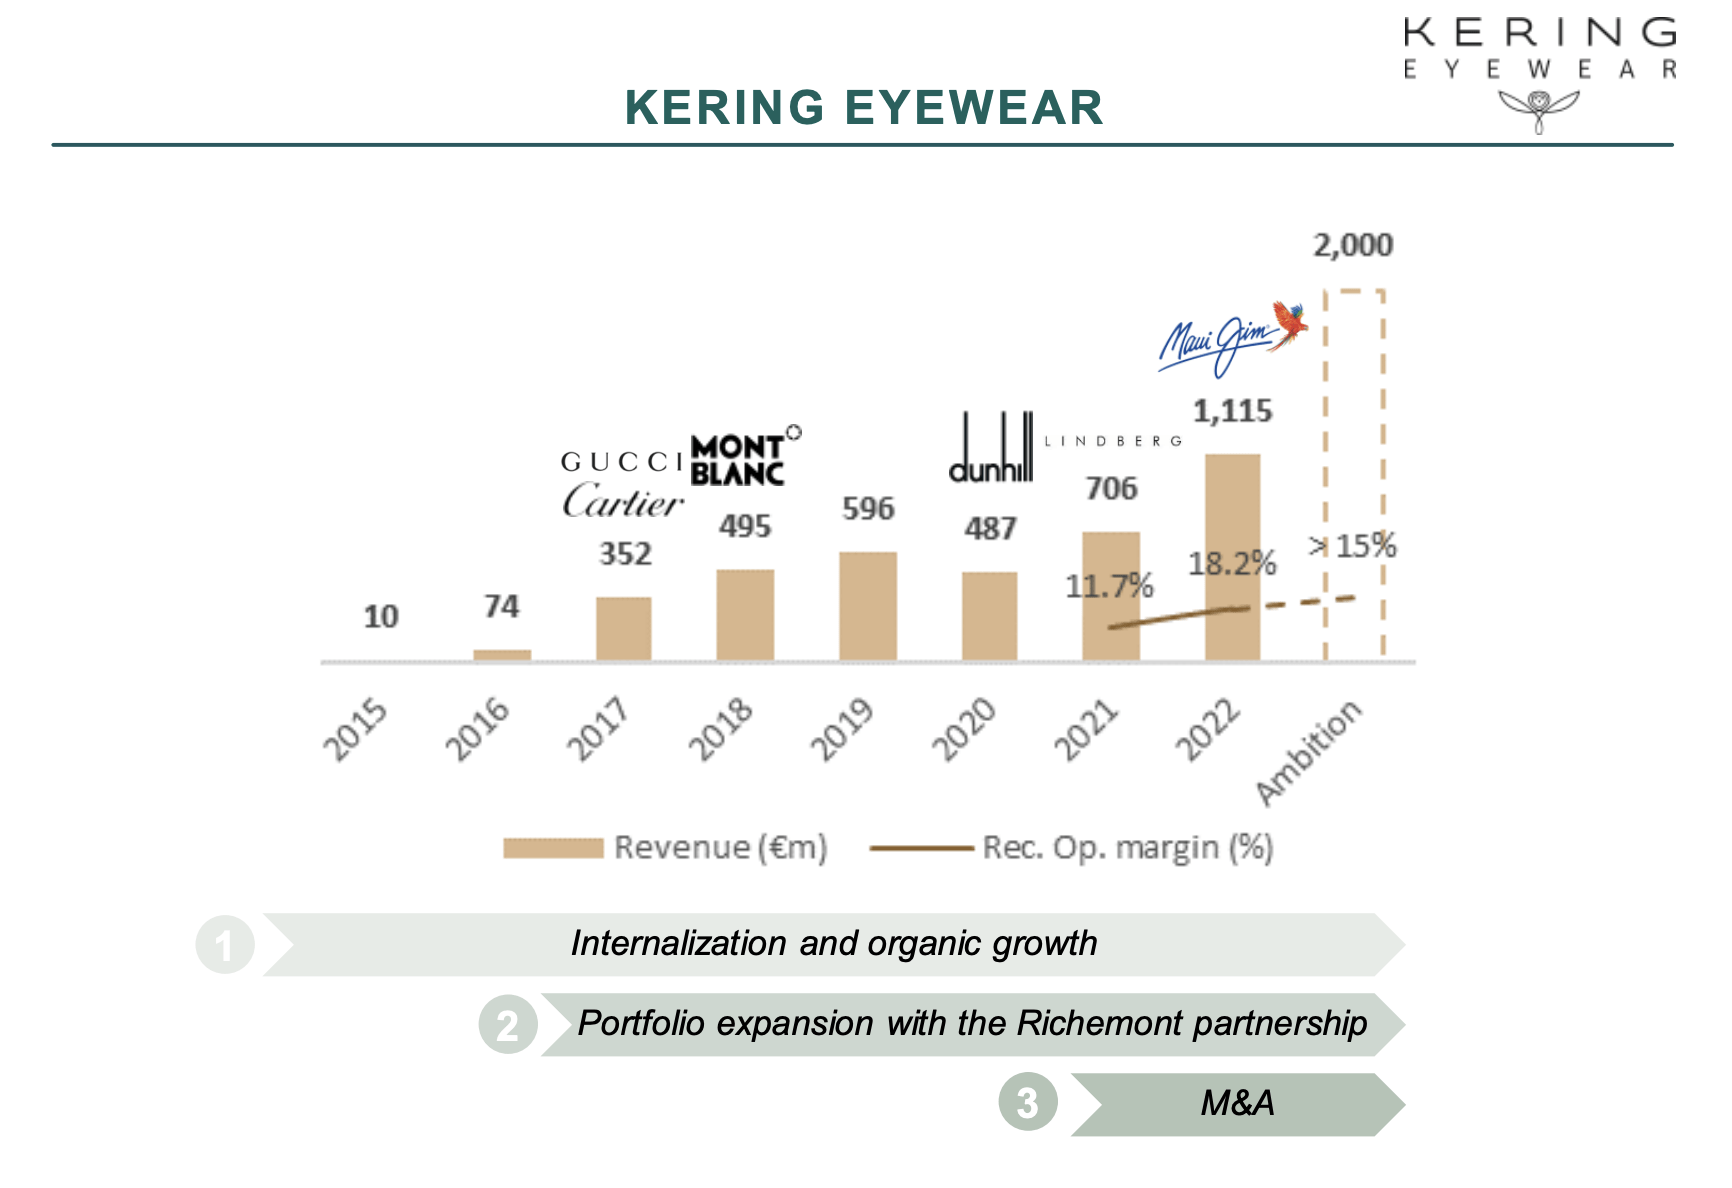 Kering Is As Expensive As Its Brands (OTCMKTS:PPRUF)